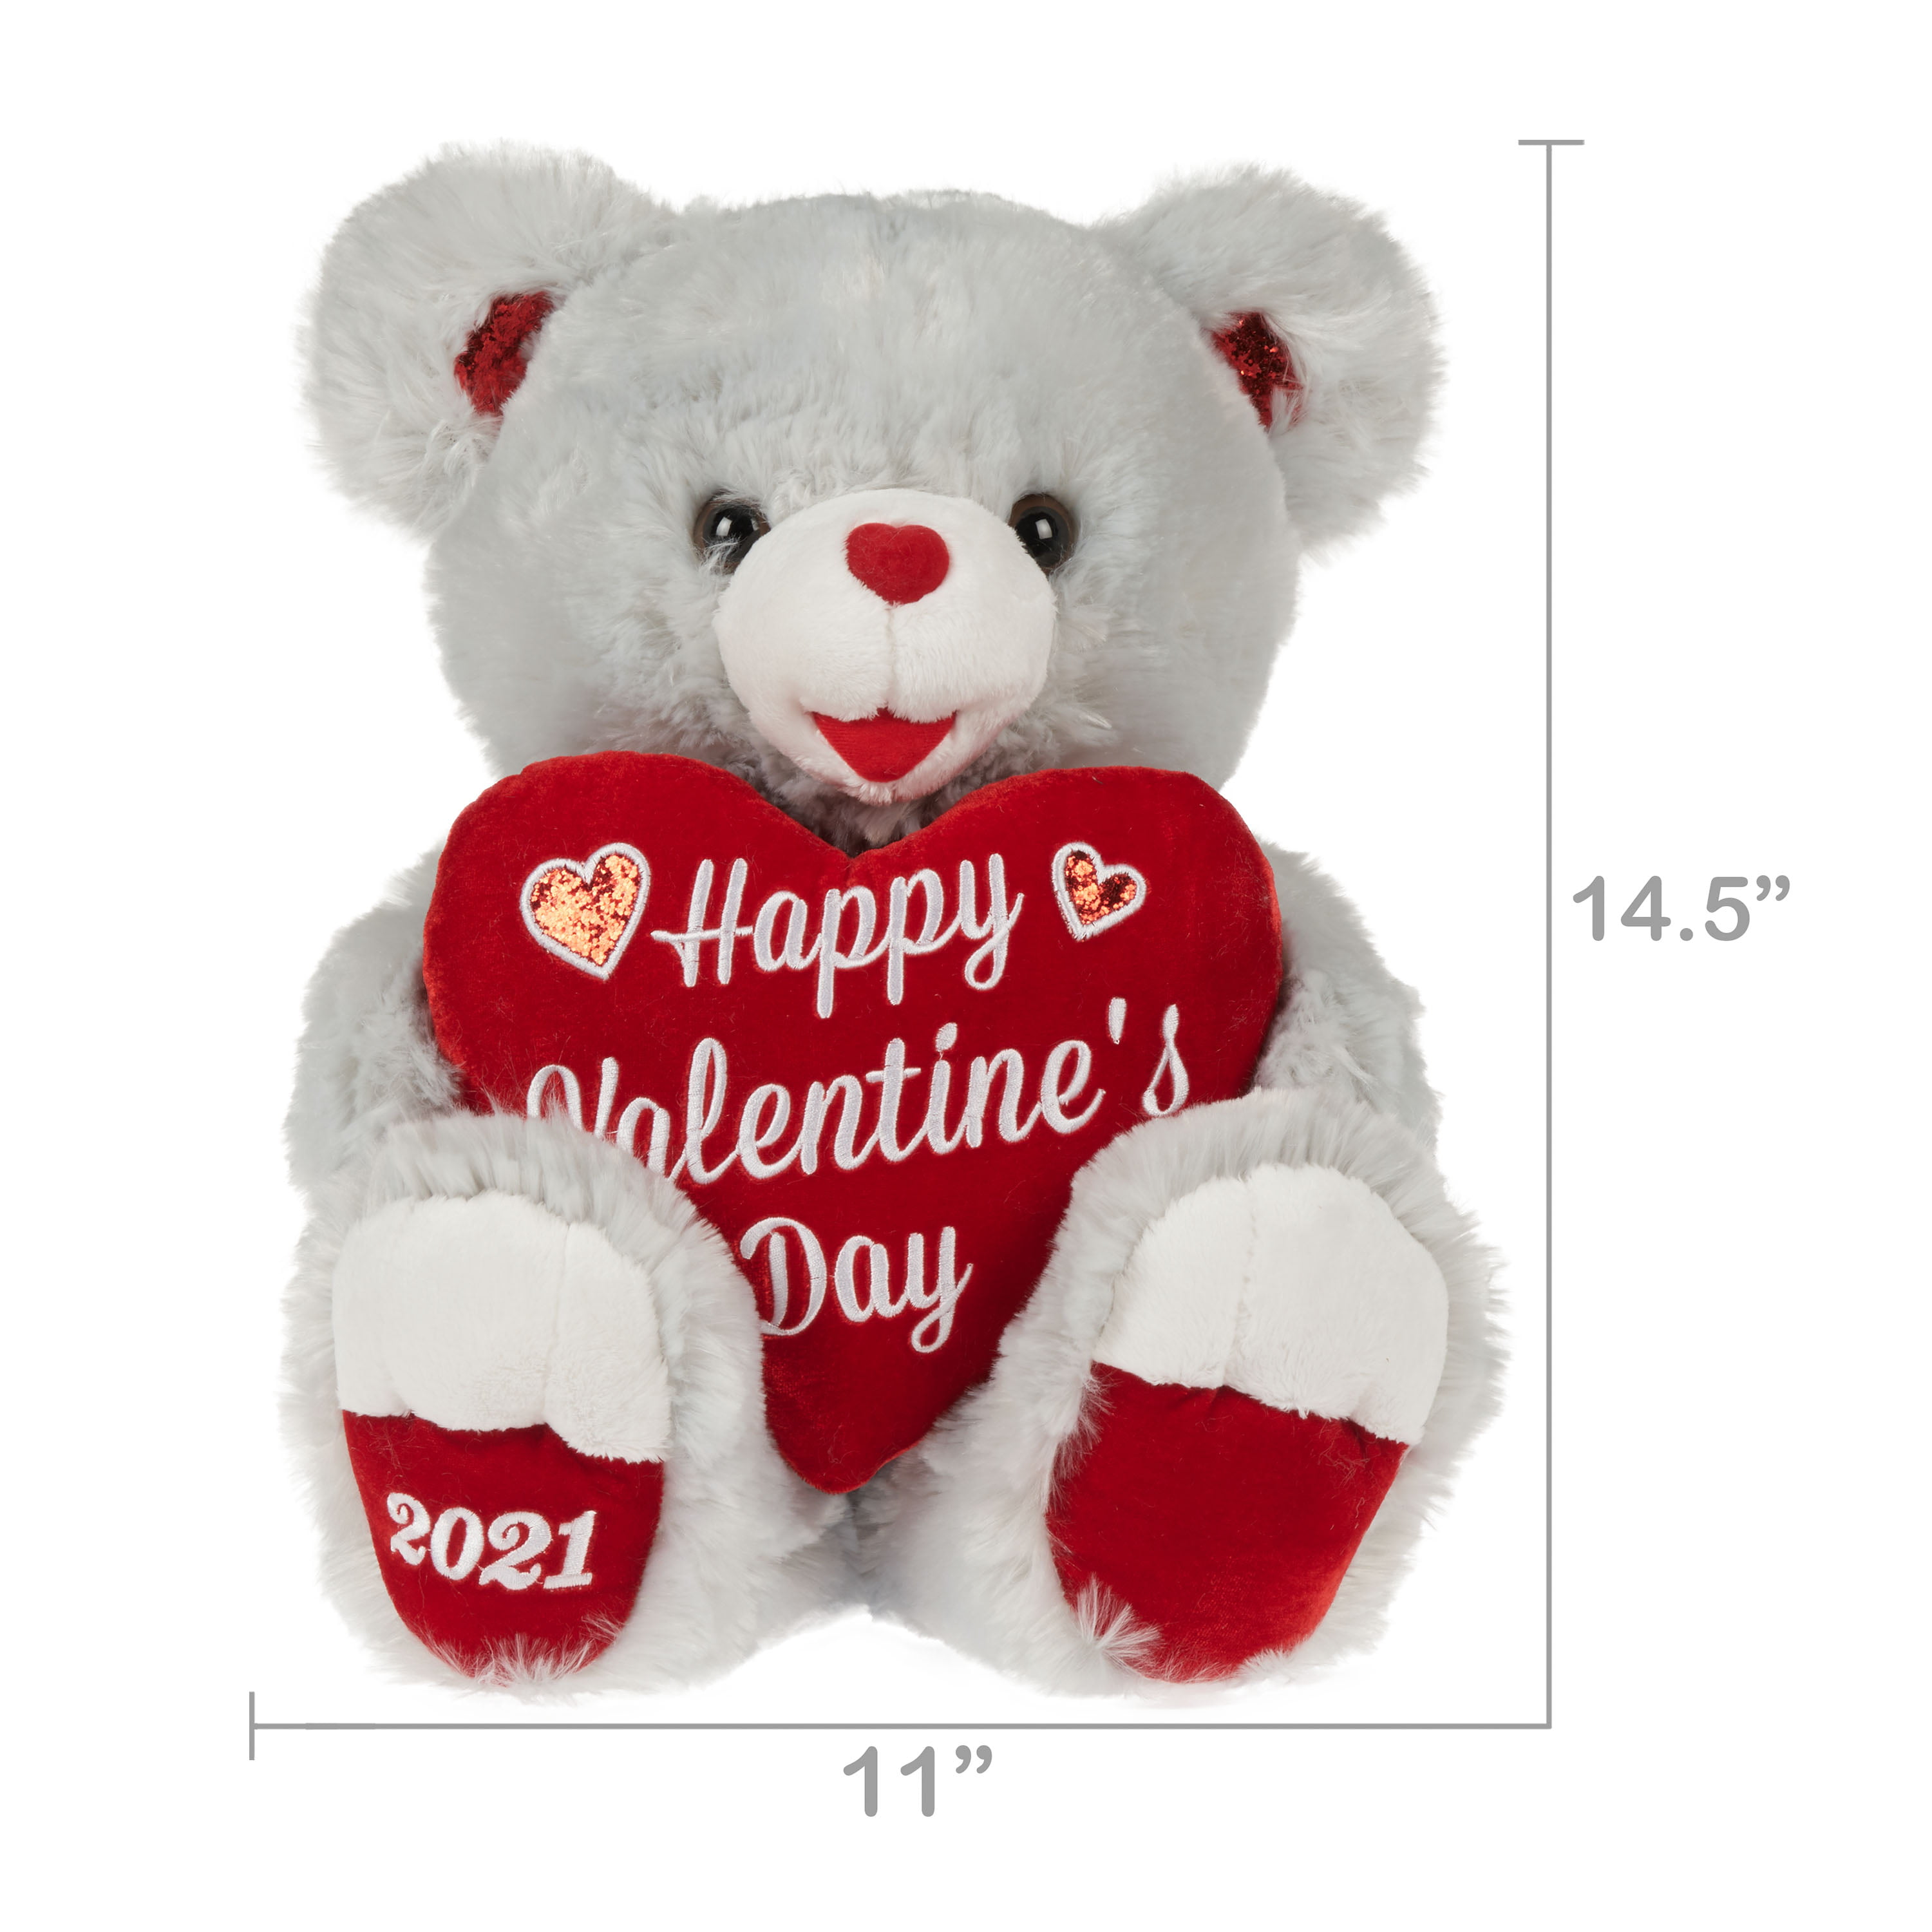 New High Quality Teddy Bear For Girl Friend Valentines Day Gift Free Shipping 